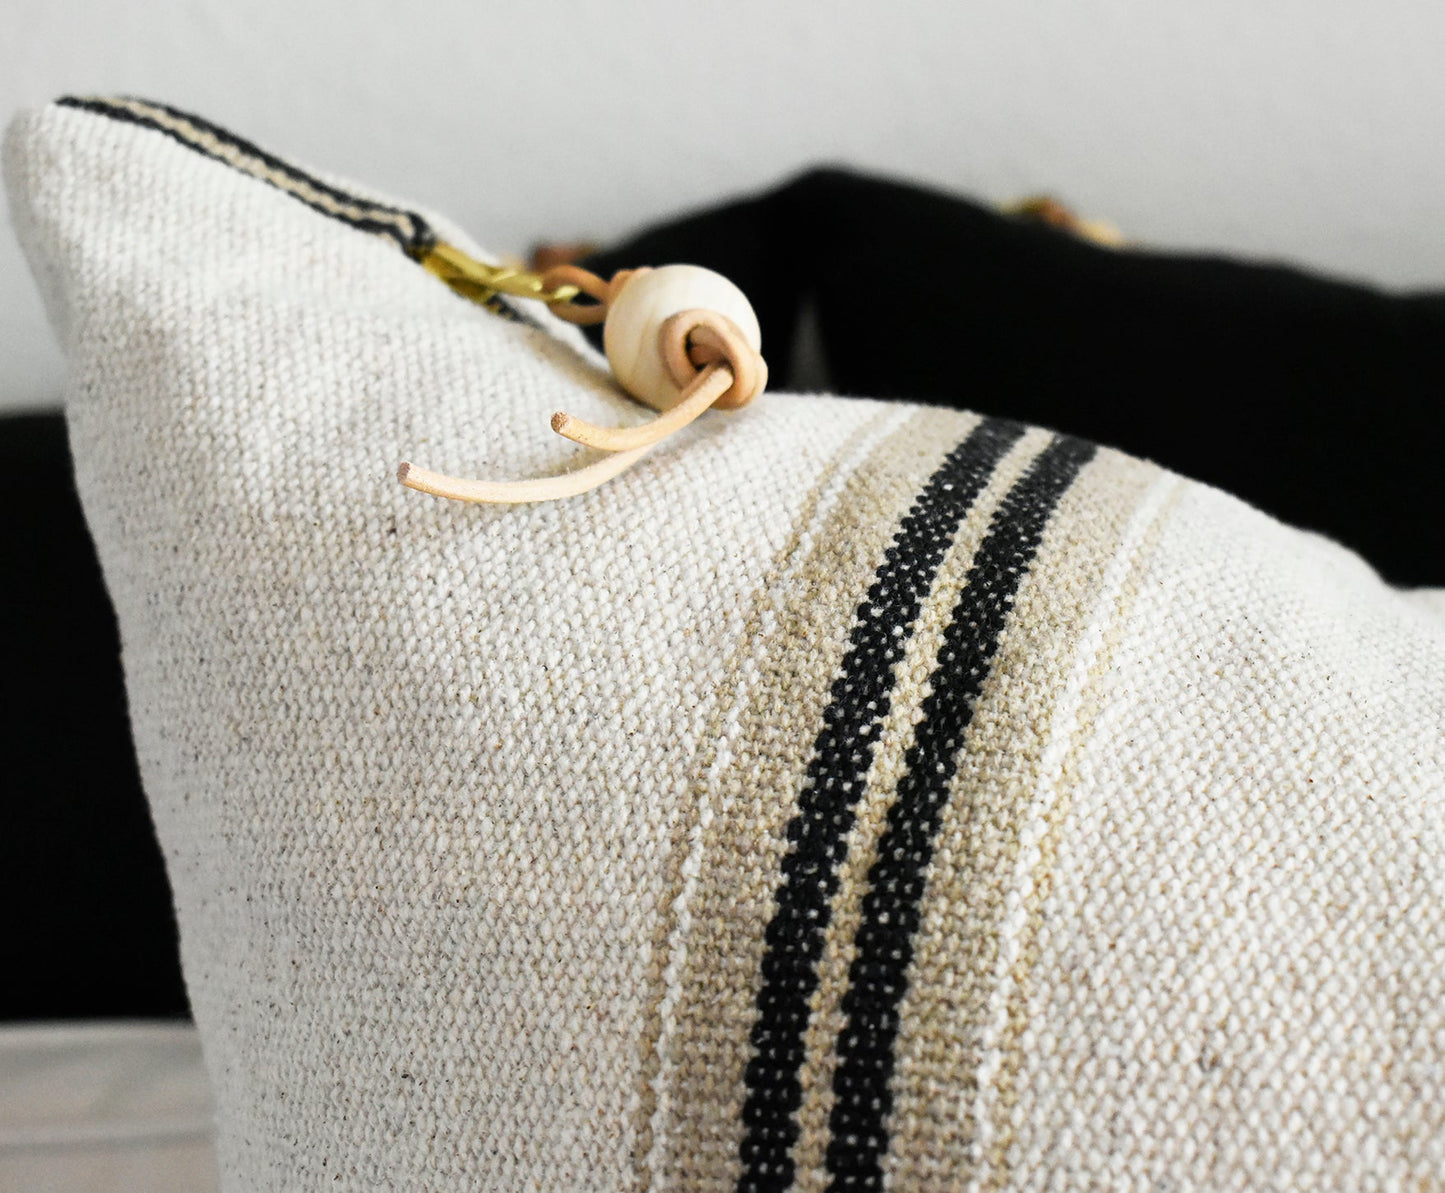 Heavy Linen Pillow with Black Stripes